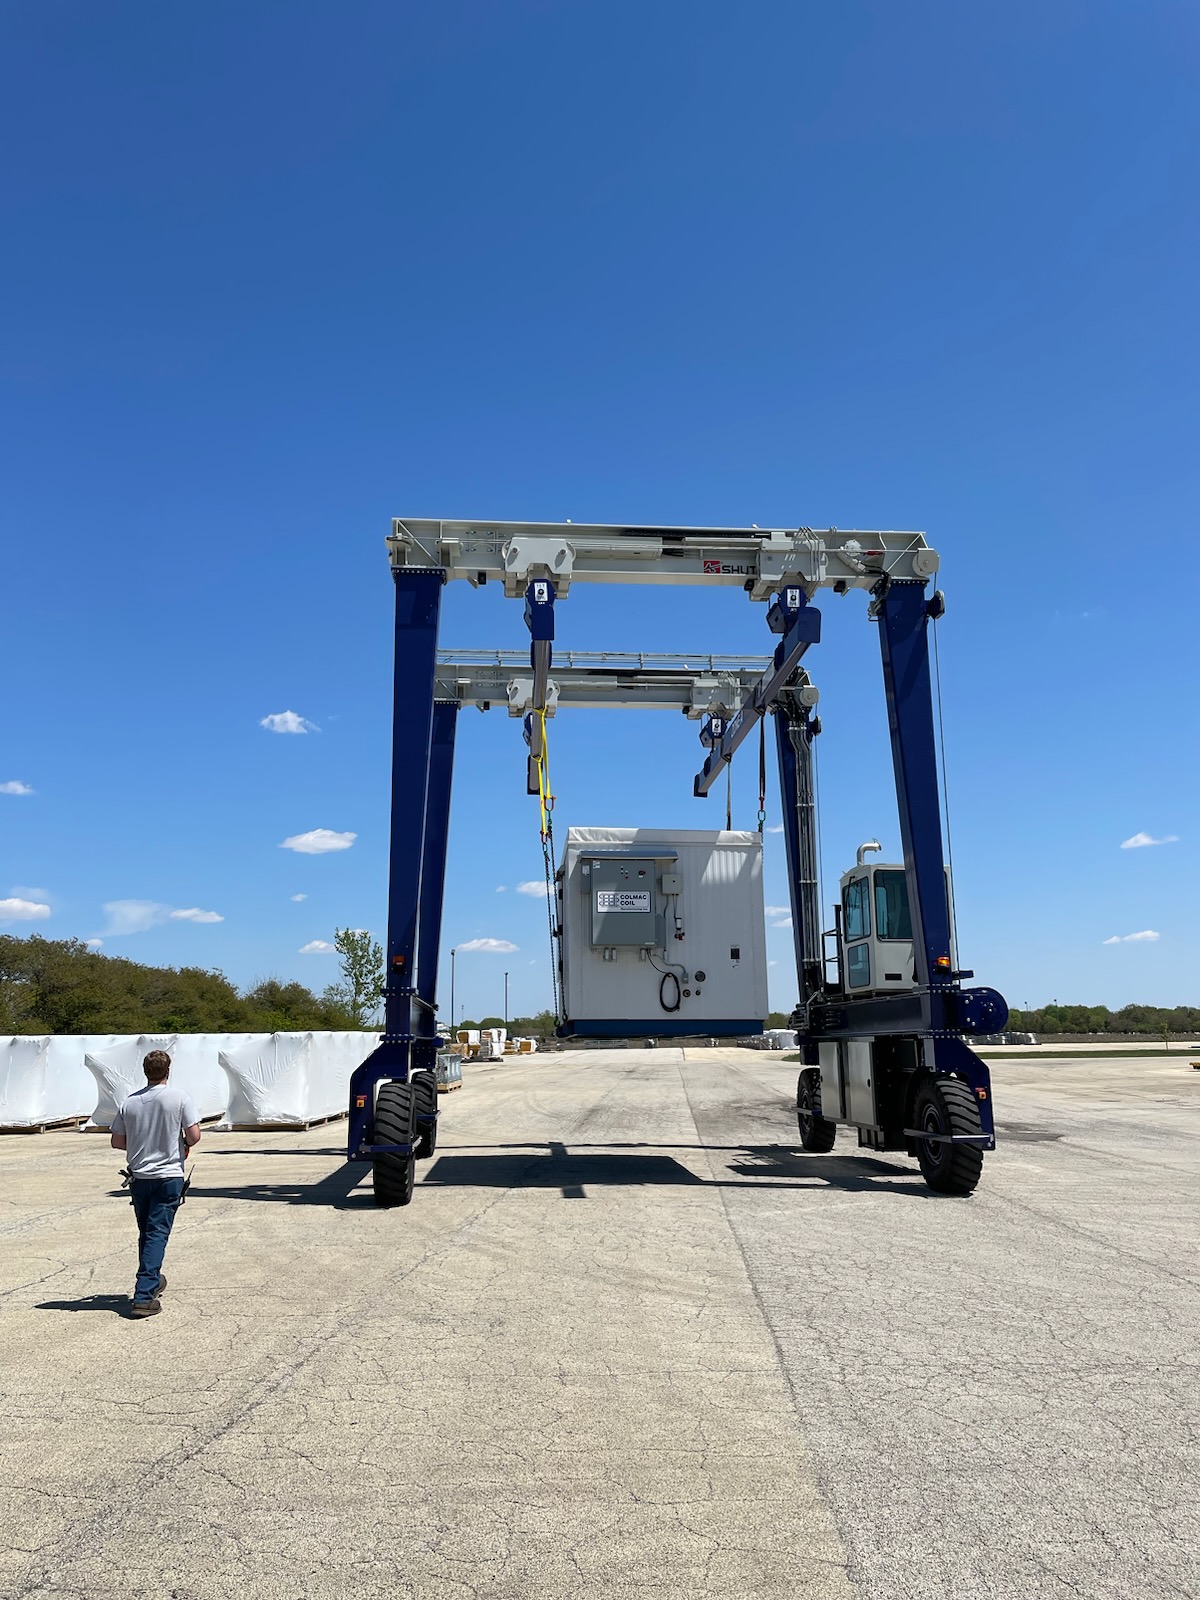 New Mobile Crane Enhances HygenAir™ and A+P Shipping Capabilities at Colmac Coil Midwest Manufacturing Facility